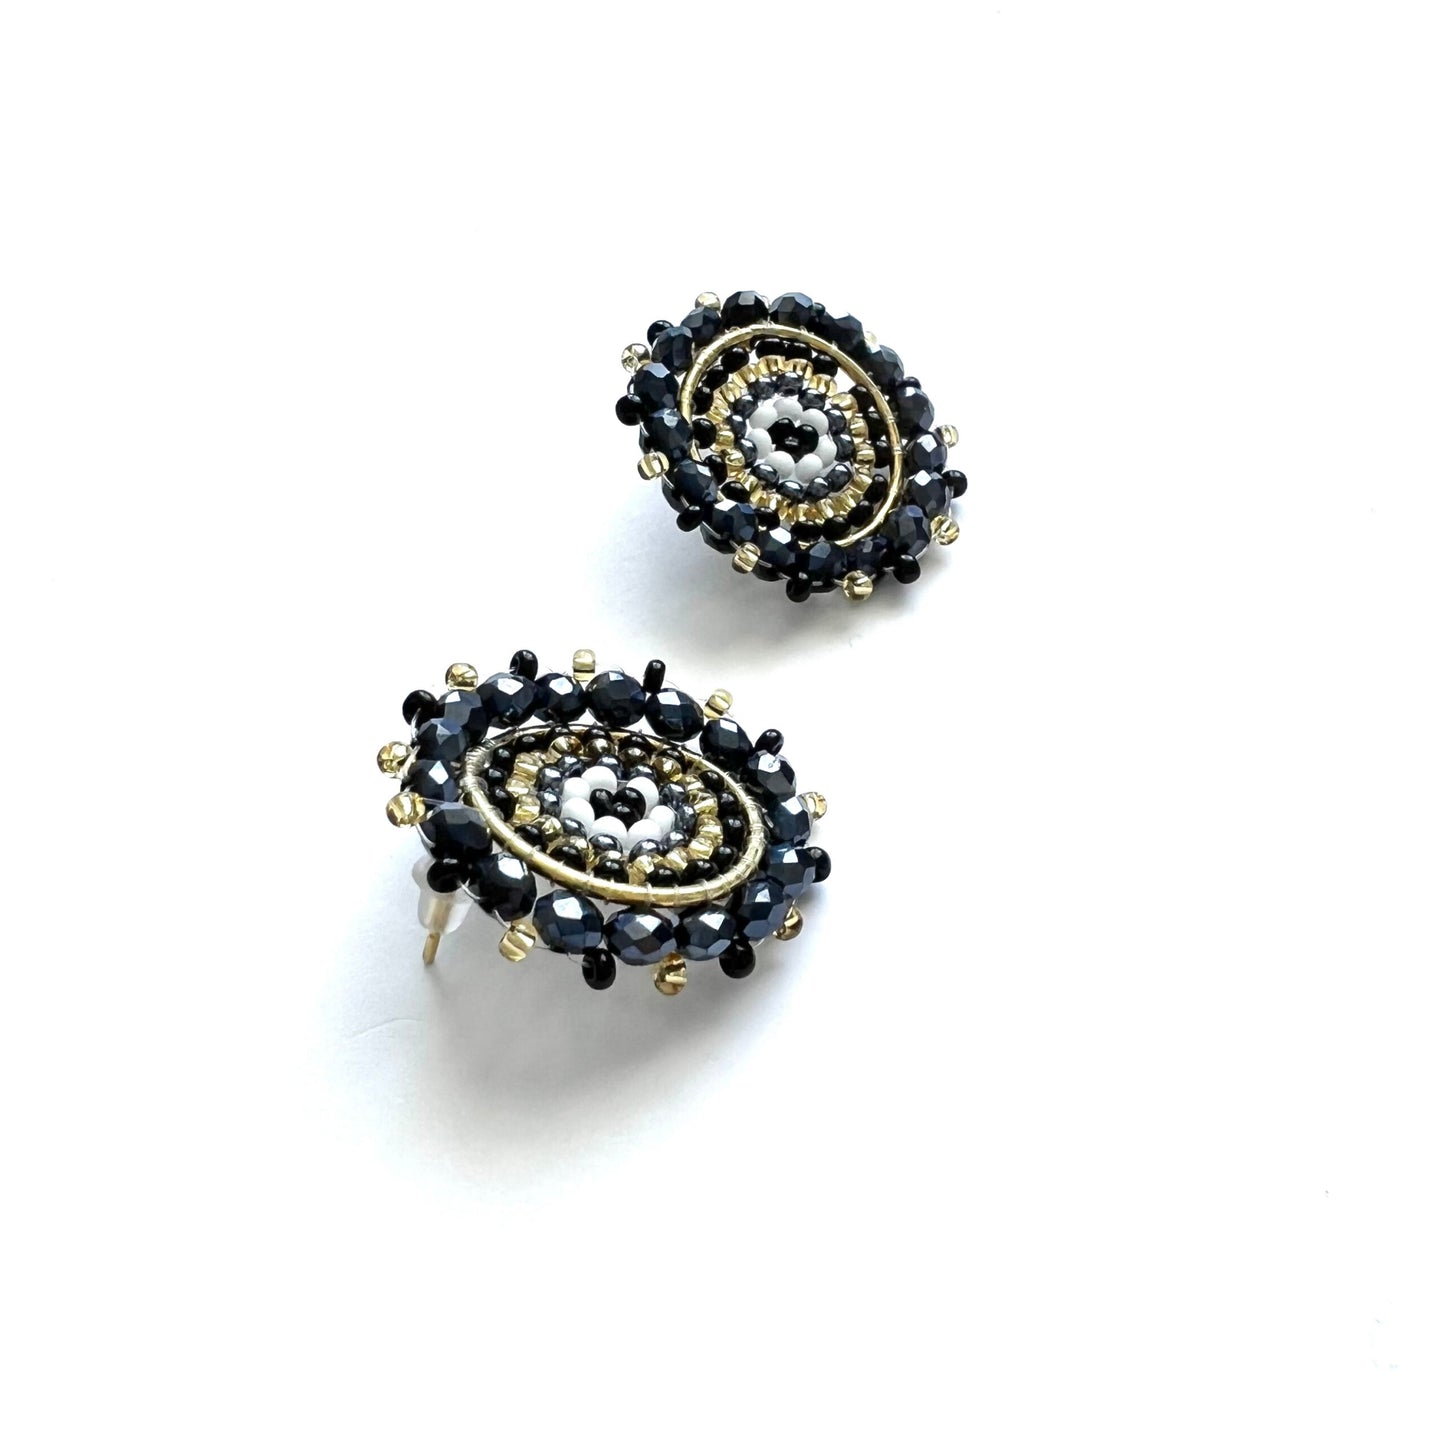 Black and Golden Circle Studs